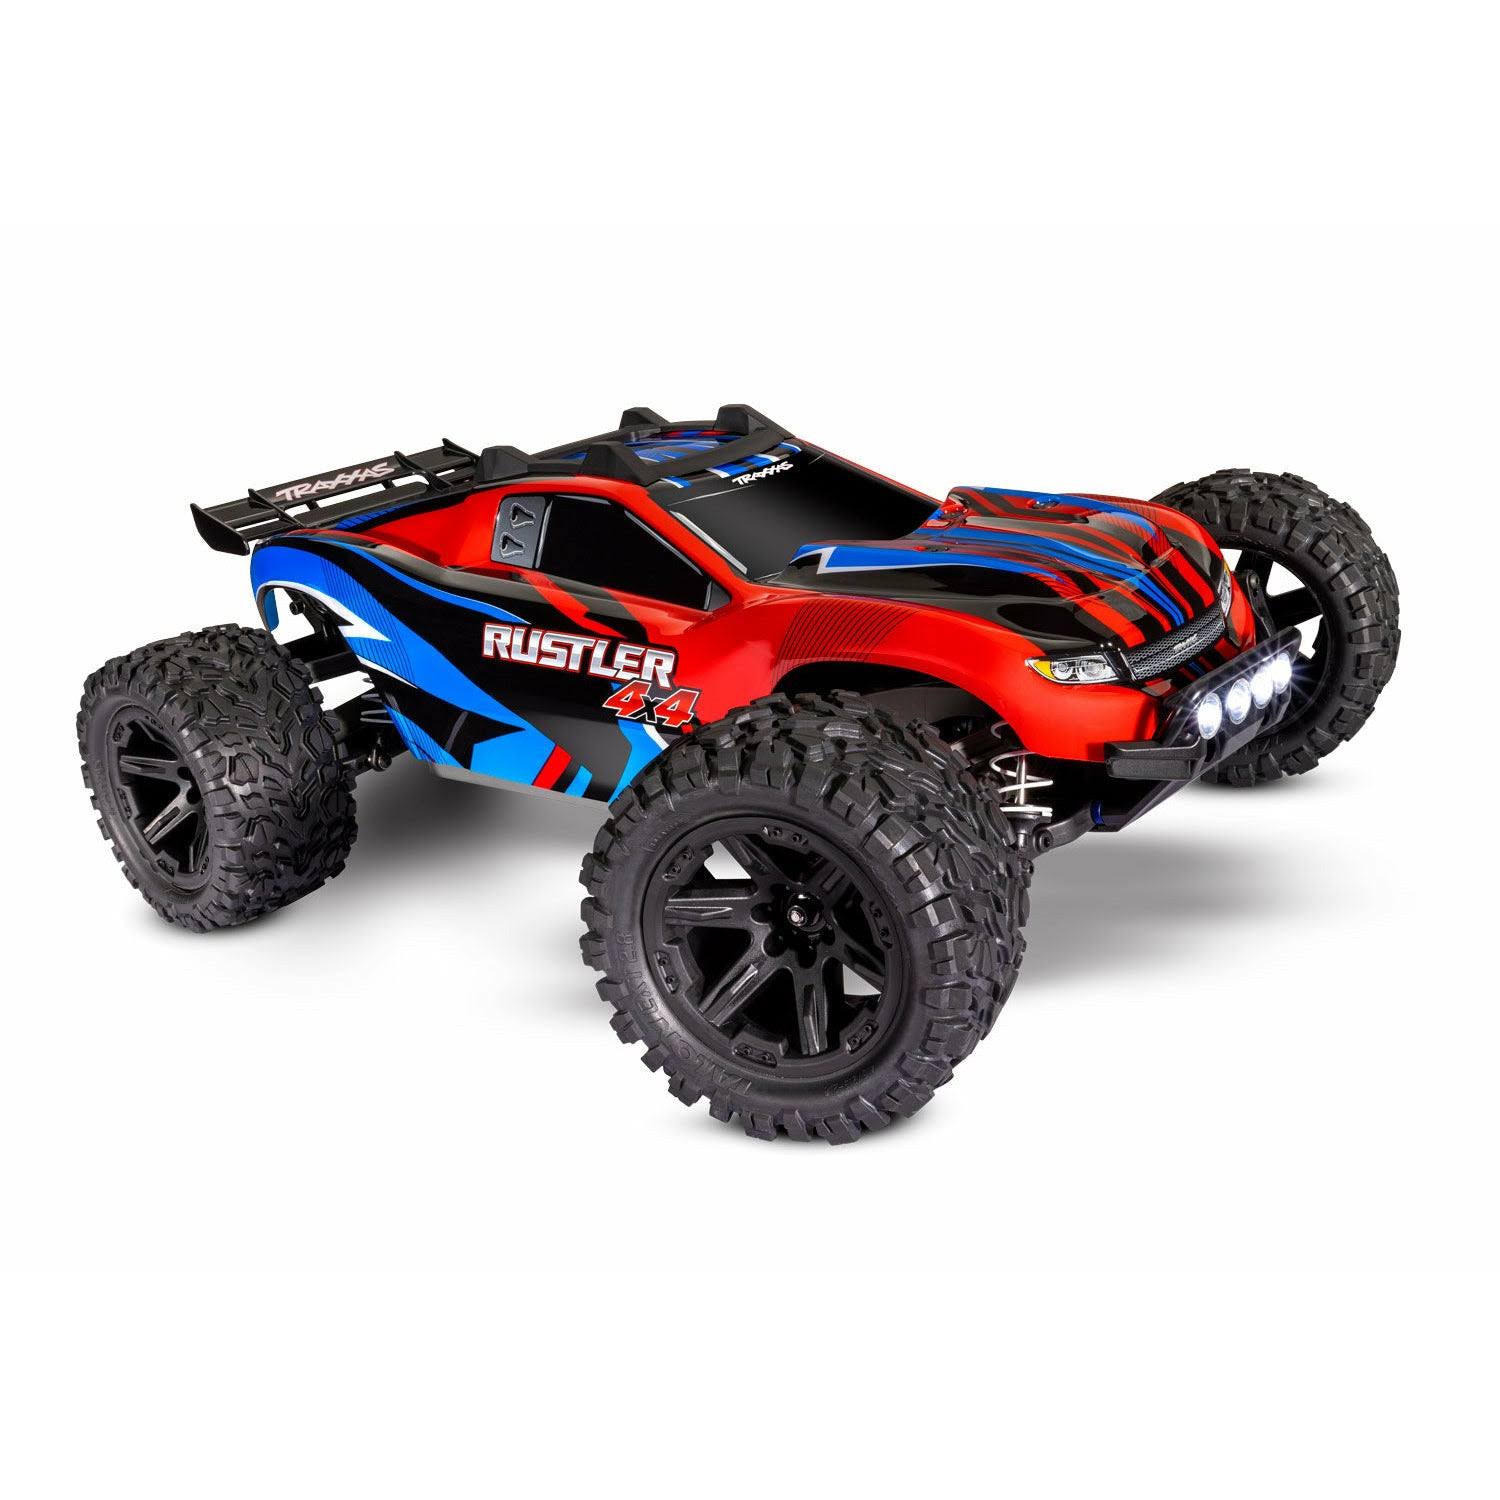 Traxxas 1/10 Rustler 4x4 4WD Stadium Truck with Led Lights - Red